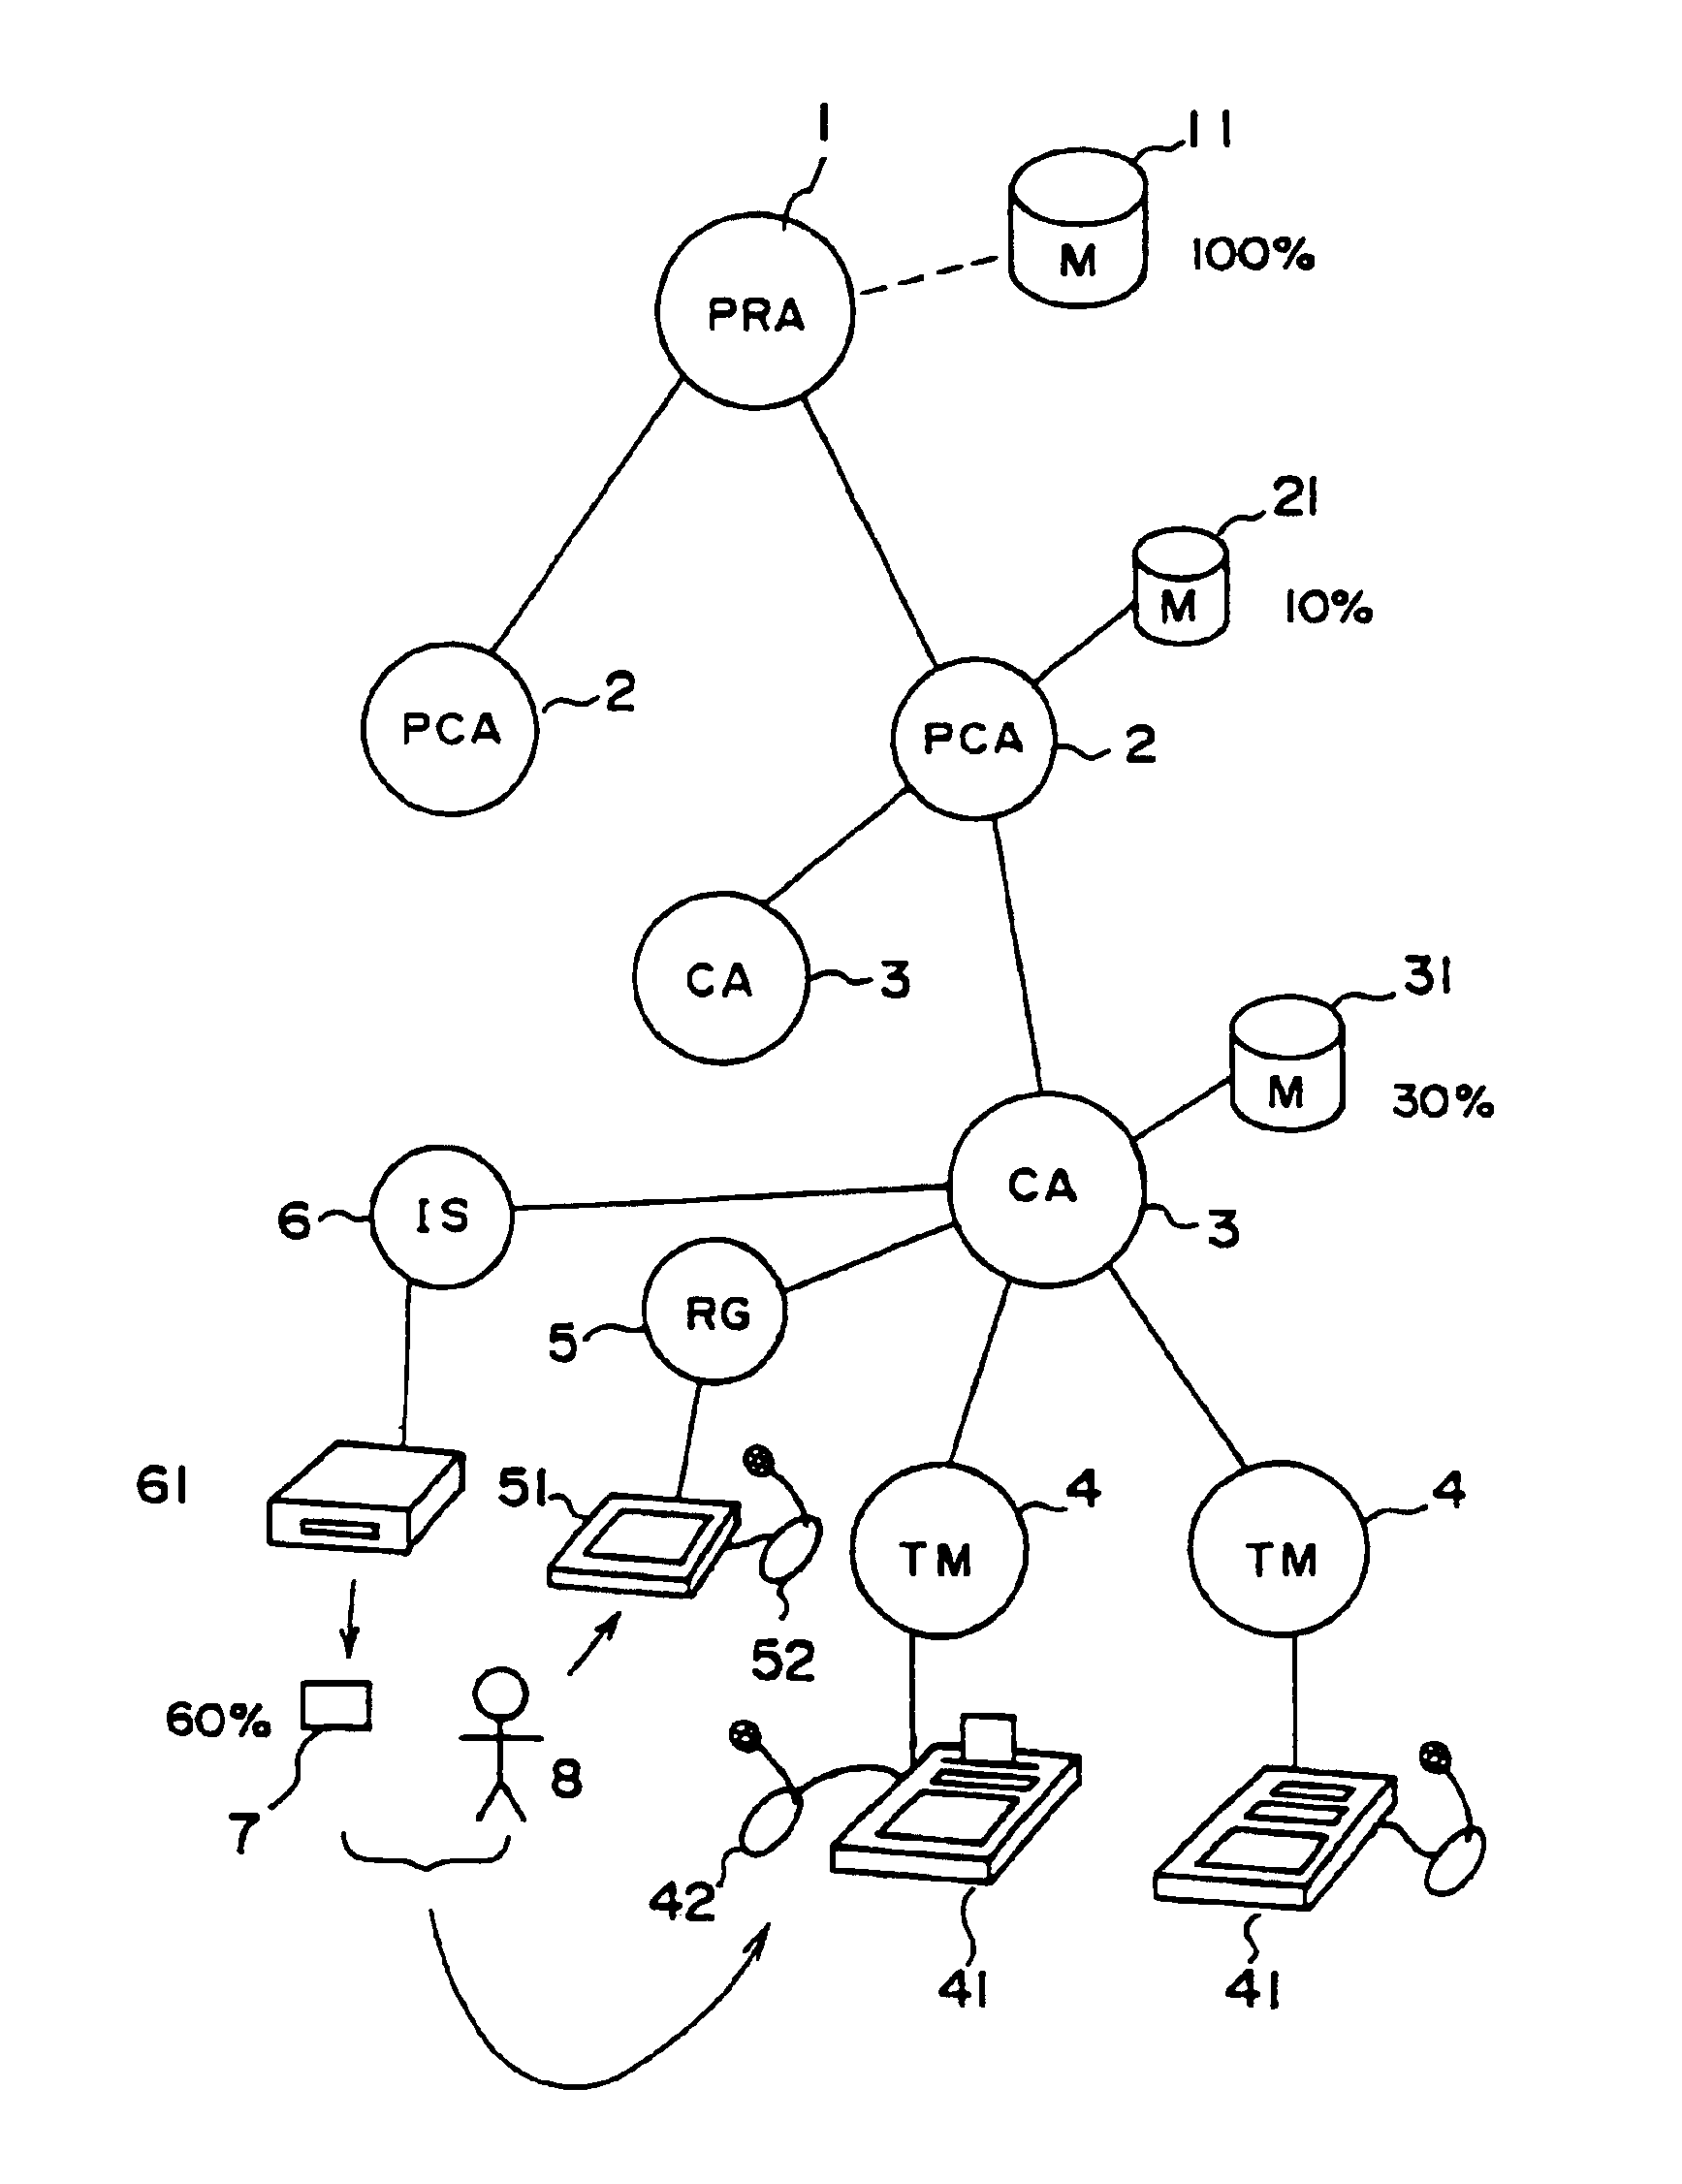 Authentication card system